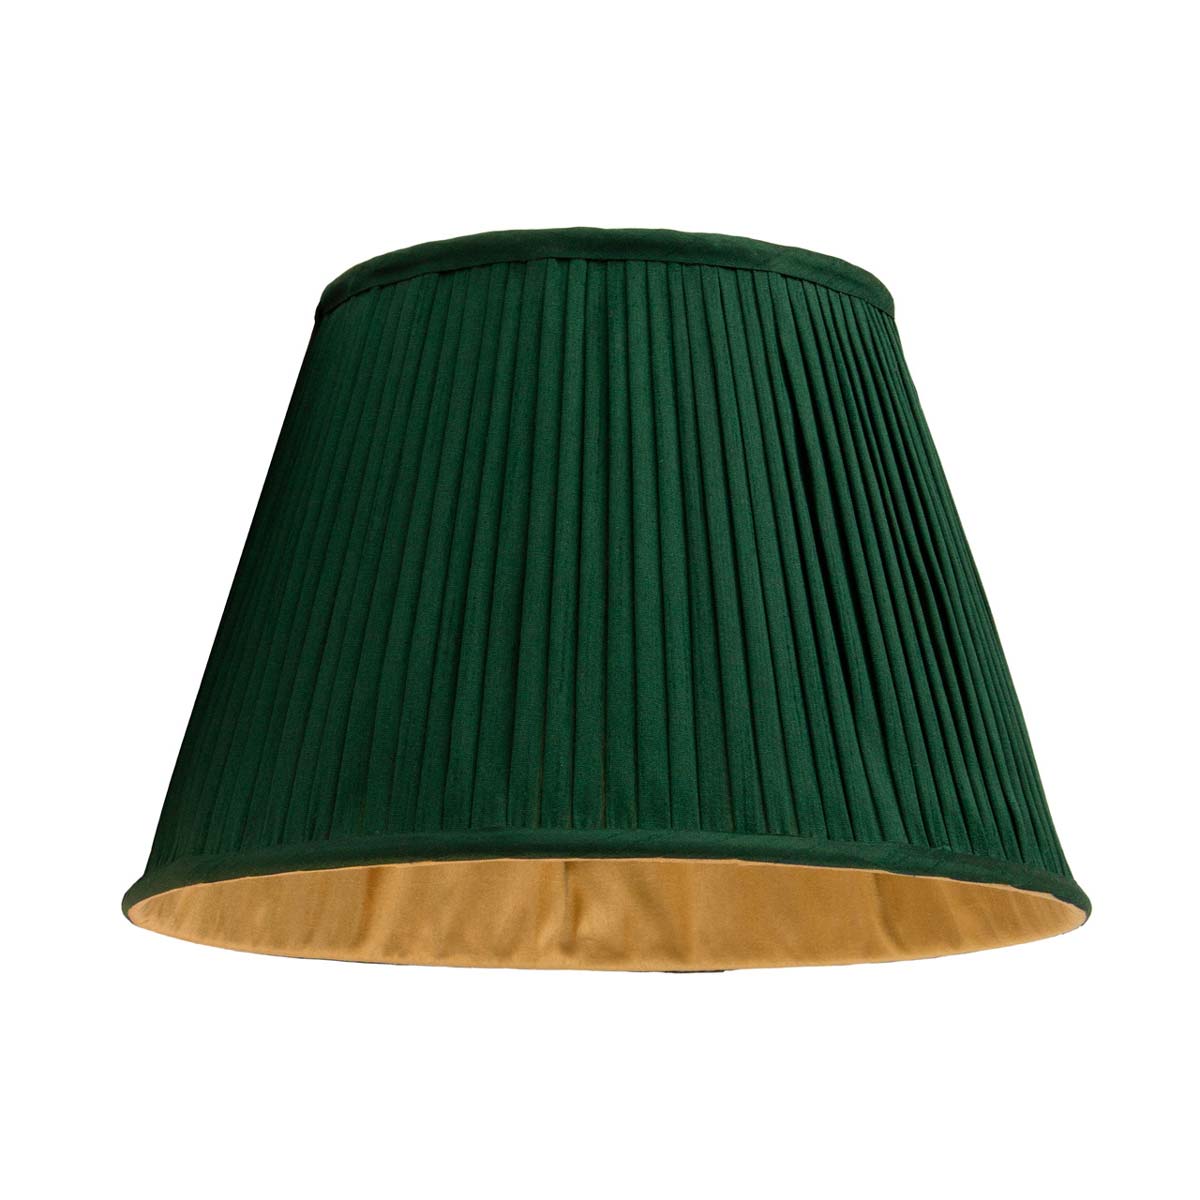 Racing green fine pleated lampshade